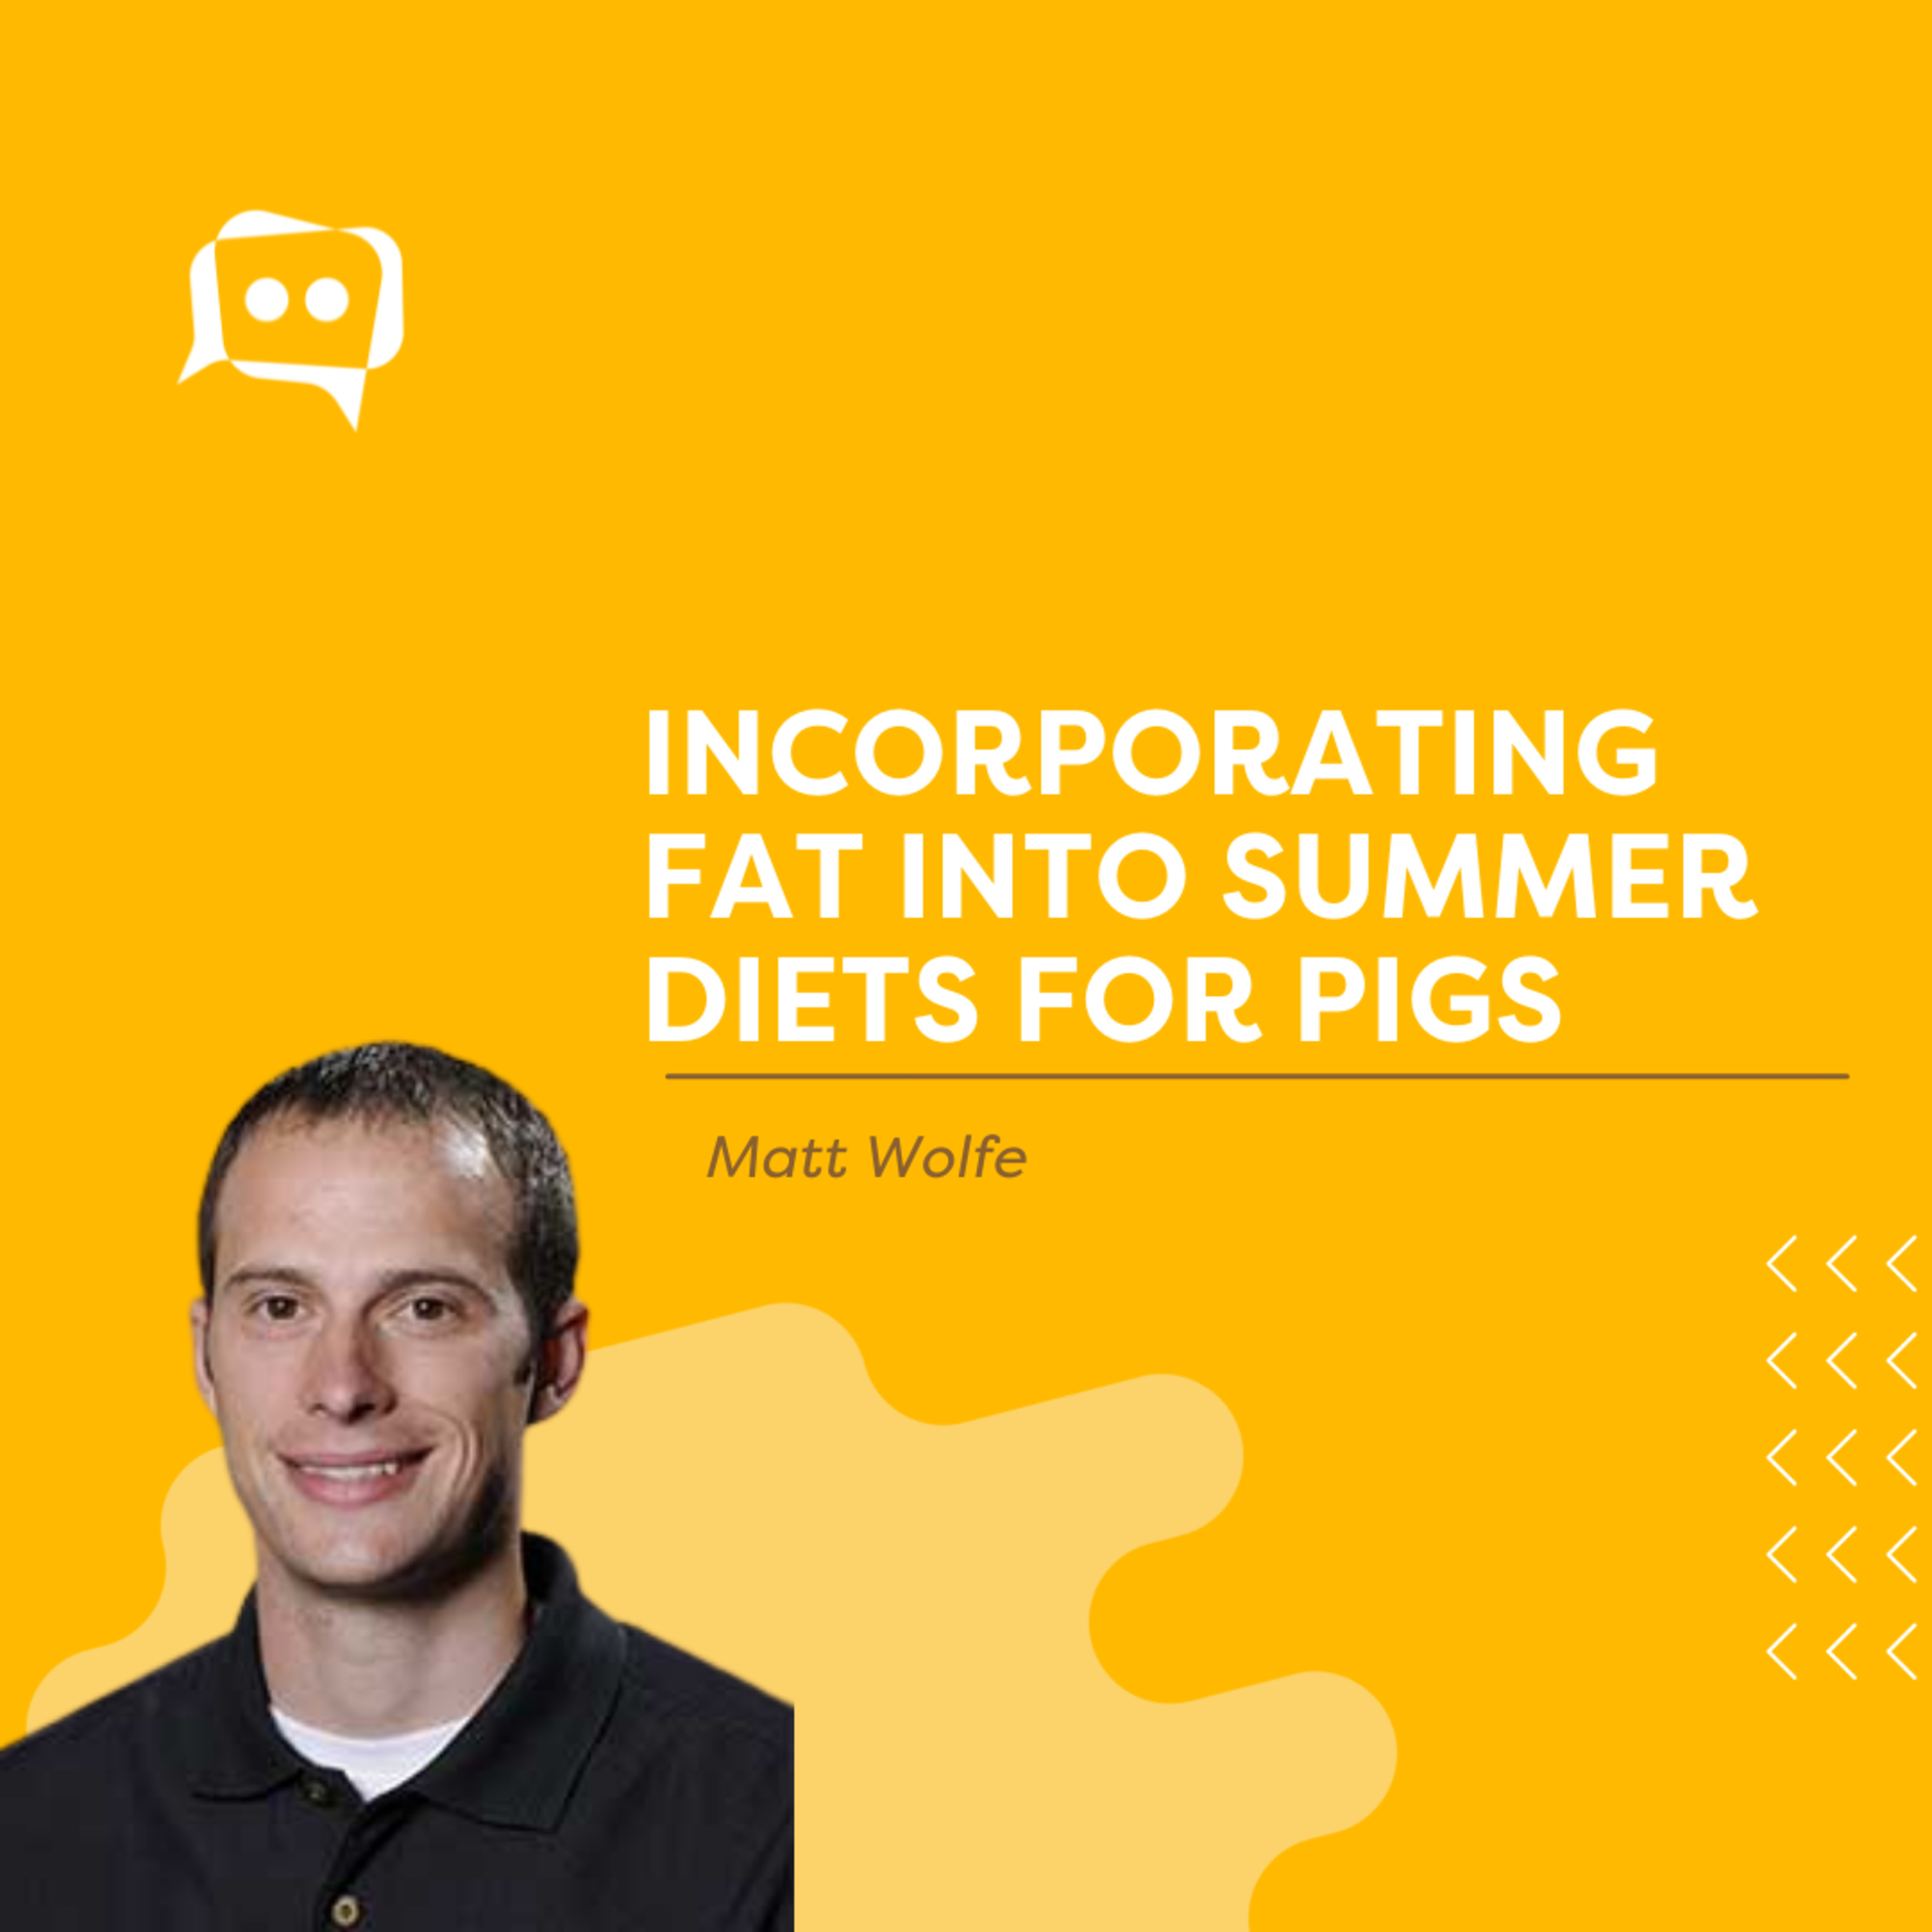 #SHORTS: Incorporating fat into summer diets for pigs, with Matt Wolfe